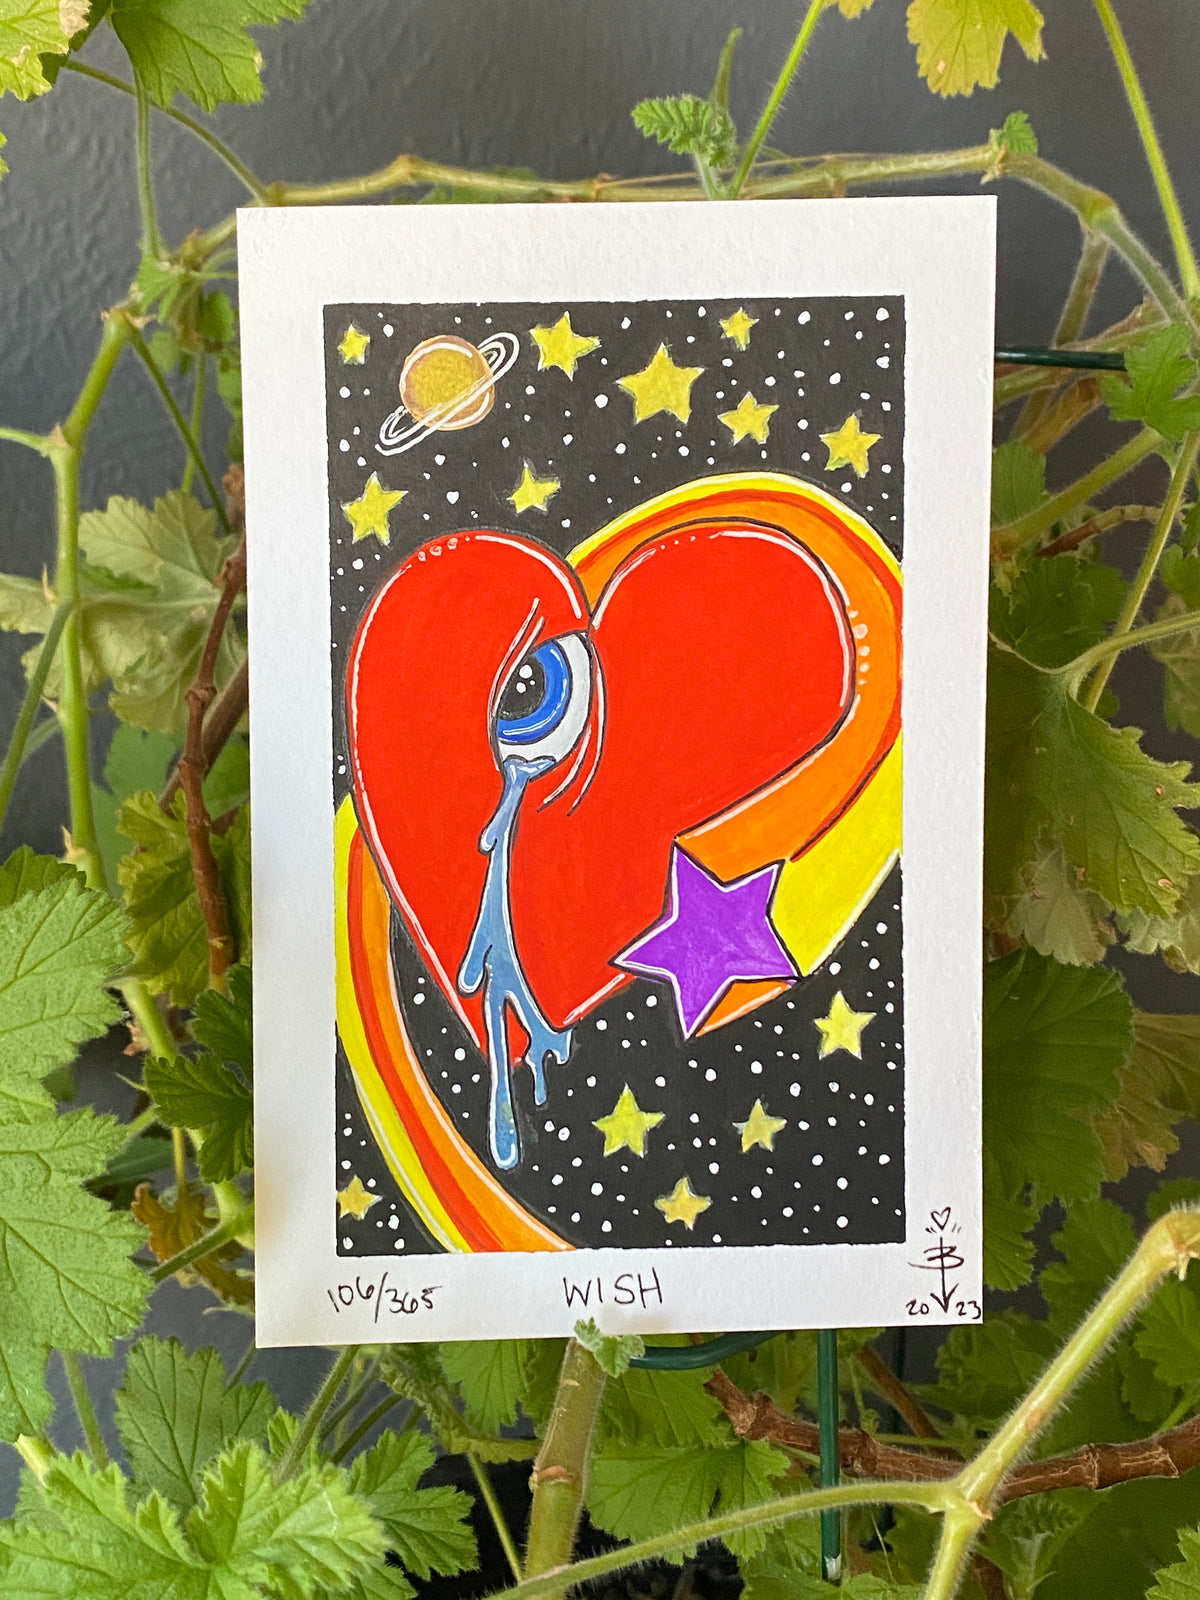 106/365 &quot;Wish&quot; - 4x6 Gouache and Ink